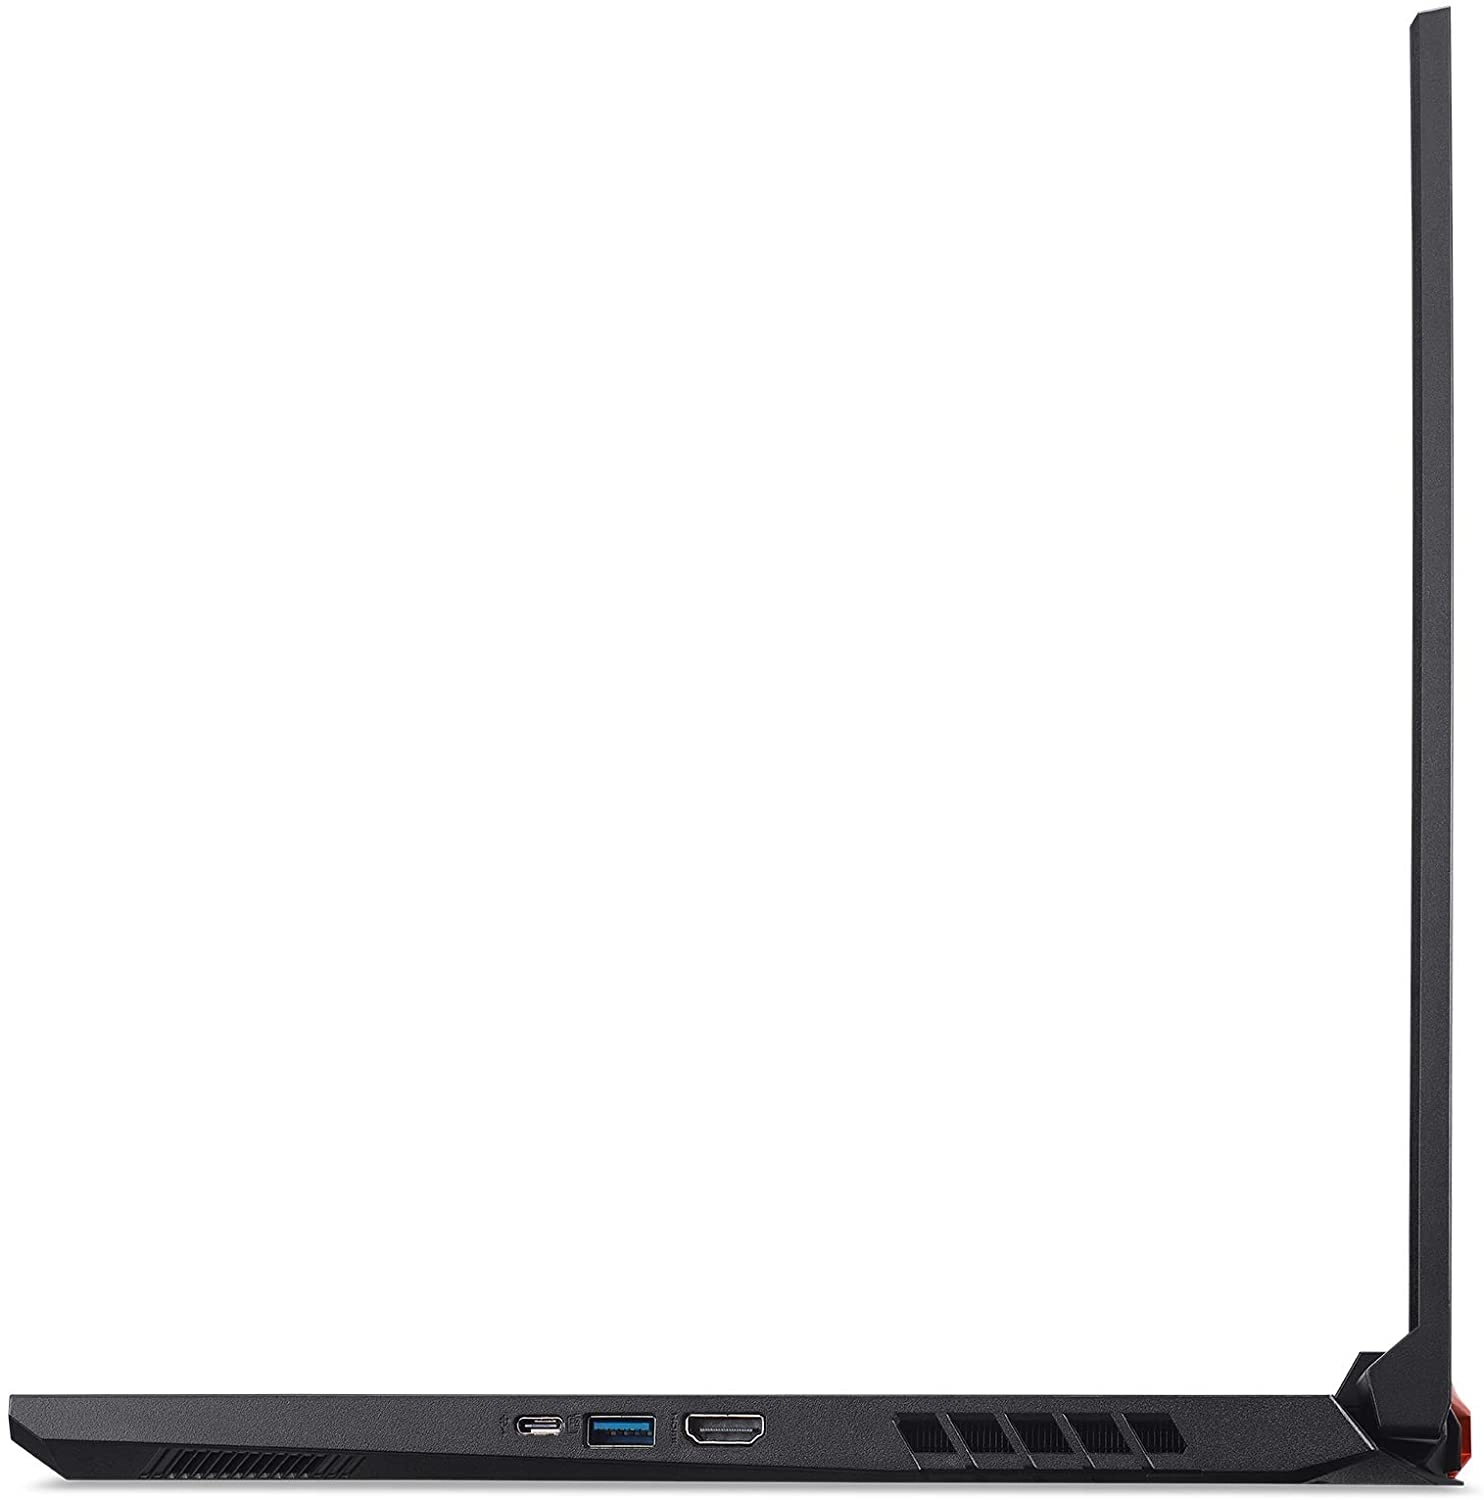 Acer AN517-41-R7EY laptop image